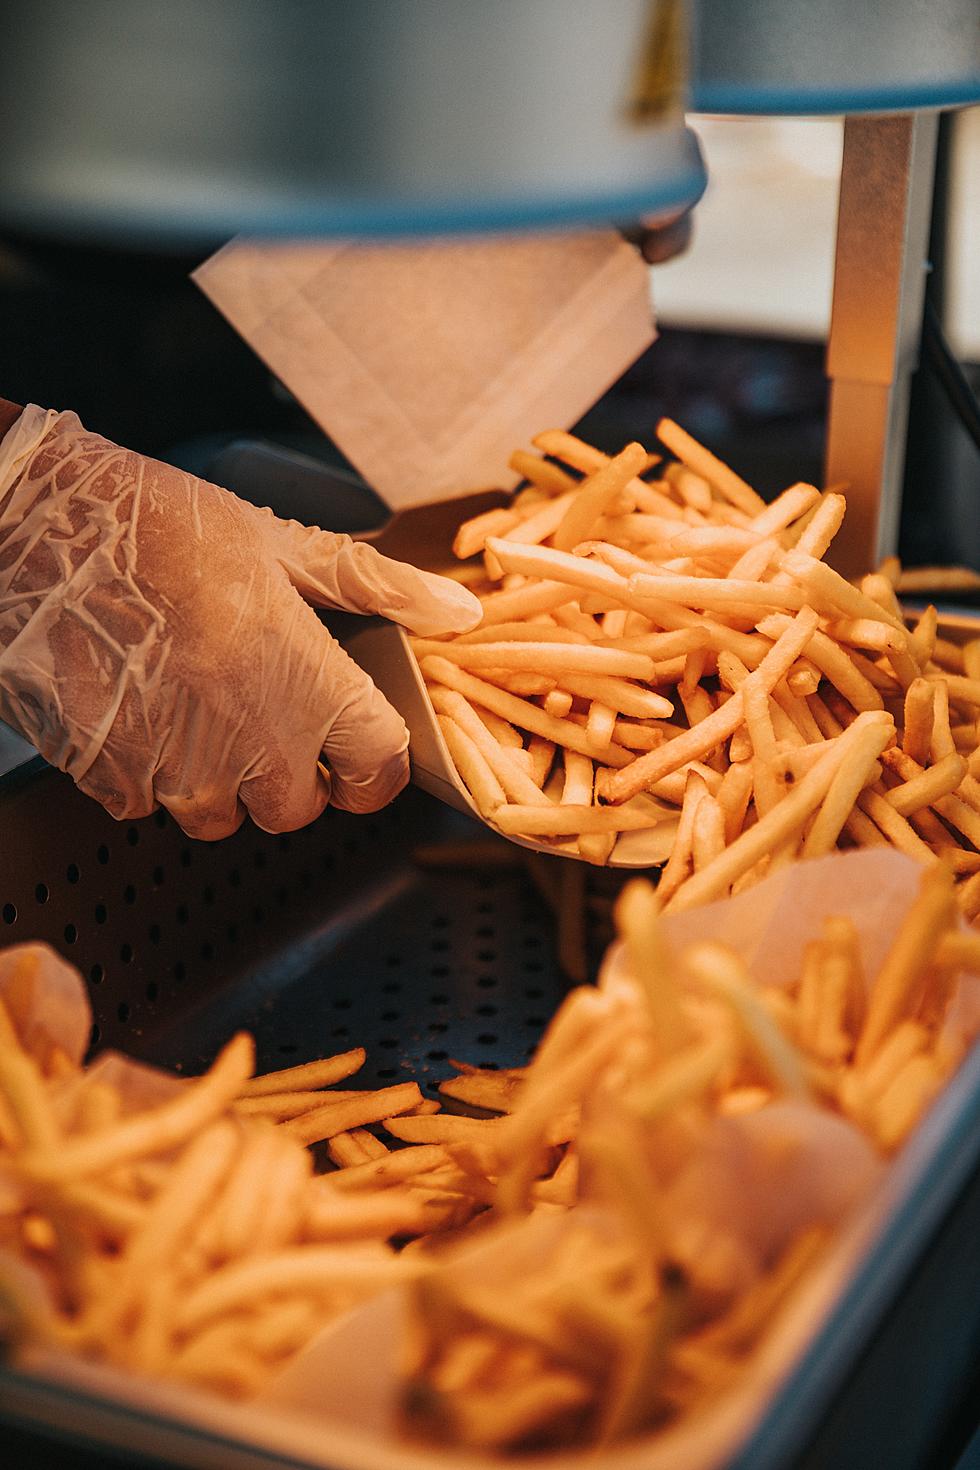 How To Get Free French Fries For The Rest of The Year In Boise